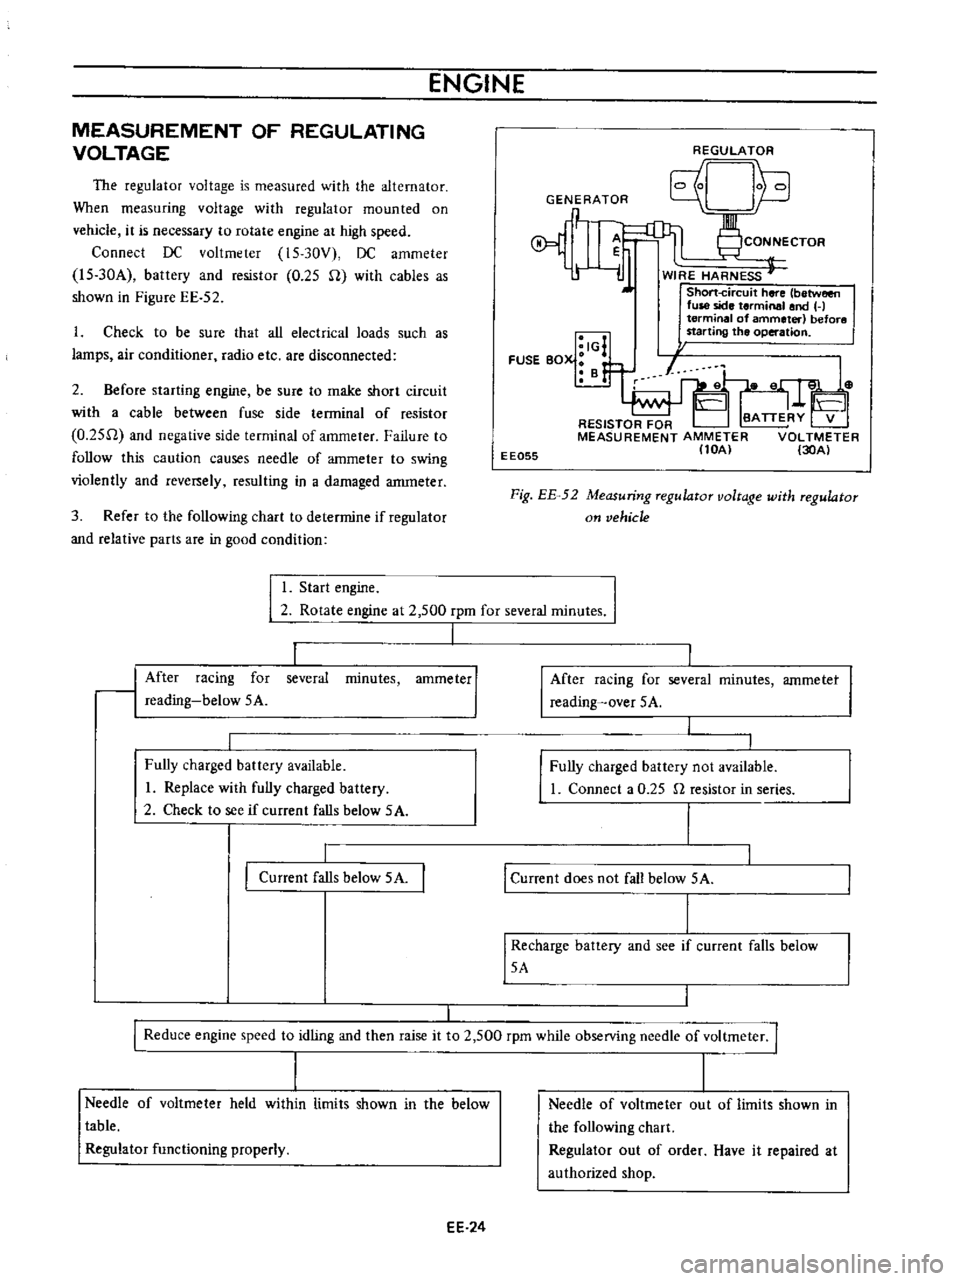 DATSUN B110 1973  Service Service Manual 
ENGINE

MEASUREMENT 
OF

REGULATING

VOLTAGE

The

regulator 
voltage 
is 
measured 
with 
the 
alternator

When

measuring 
voltage 
with

regulator 
mounted 
on

vehicle 
it 
is

necessary 
to 
rot